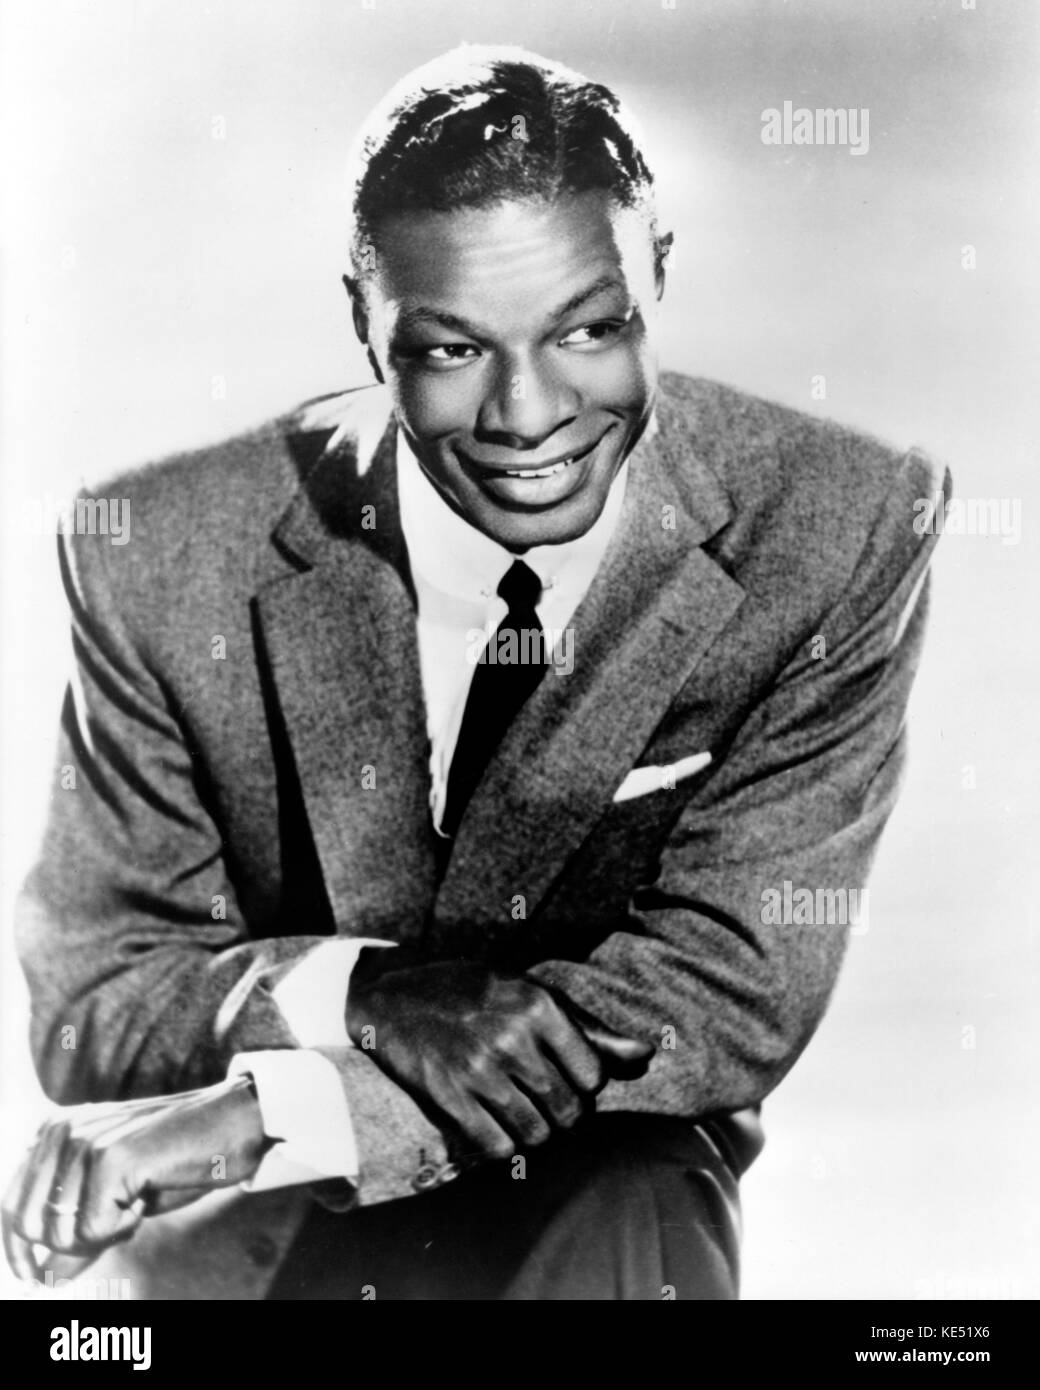 Nat King Cole - American jazz musician and singer in the 1950s. 17.3.1917 - 15.2.1965 Stock Photo